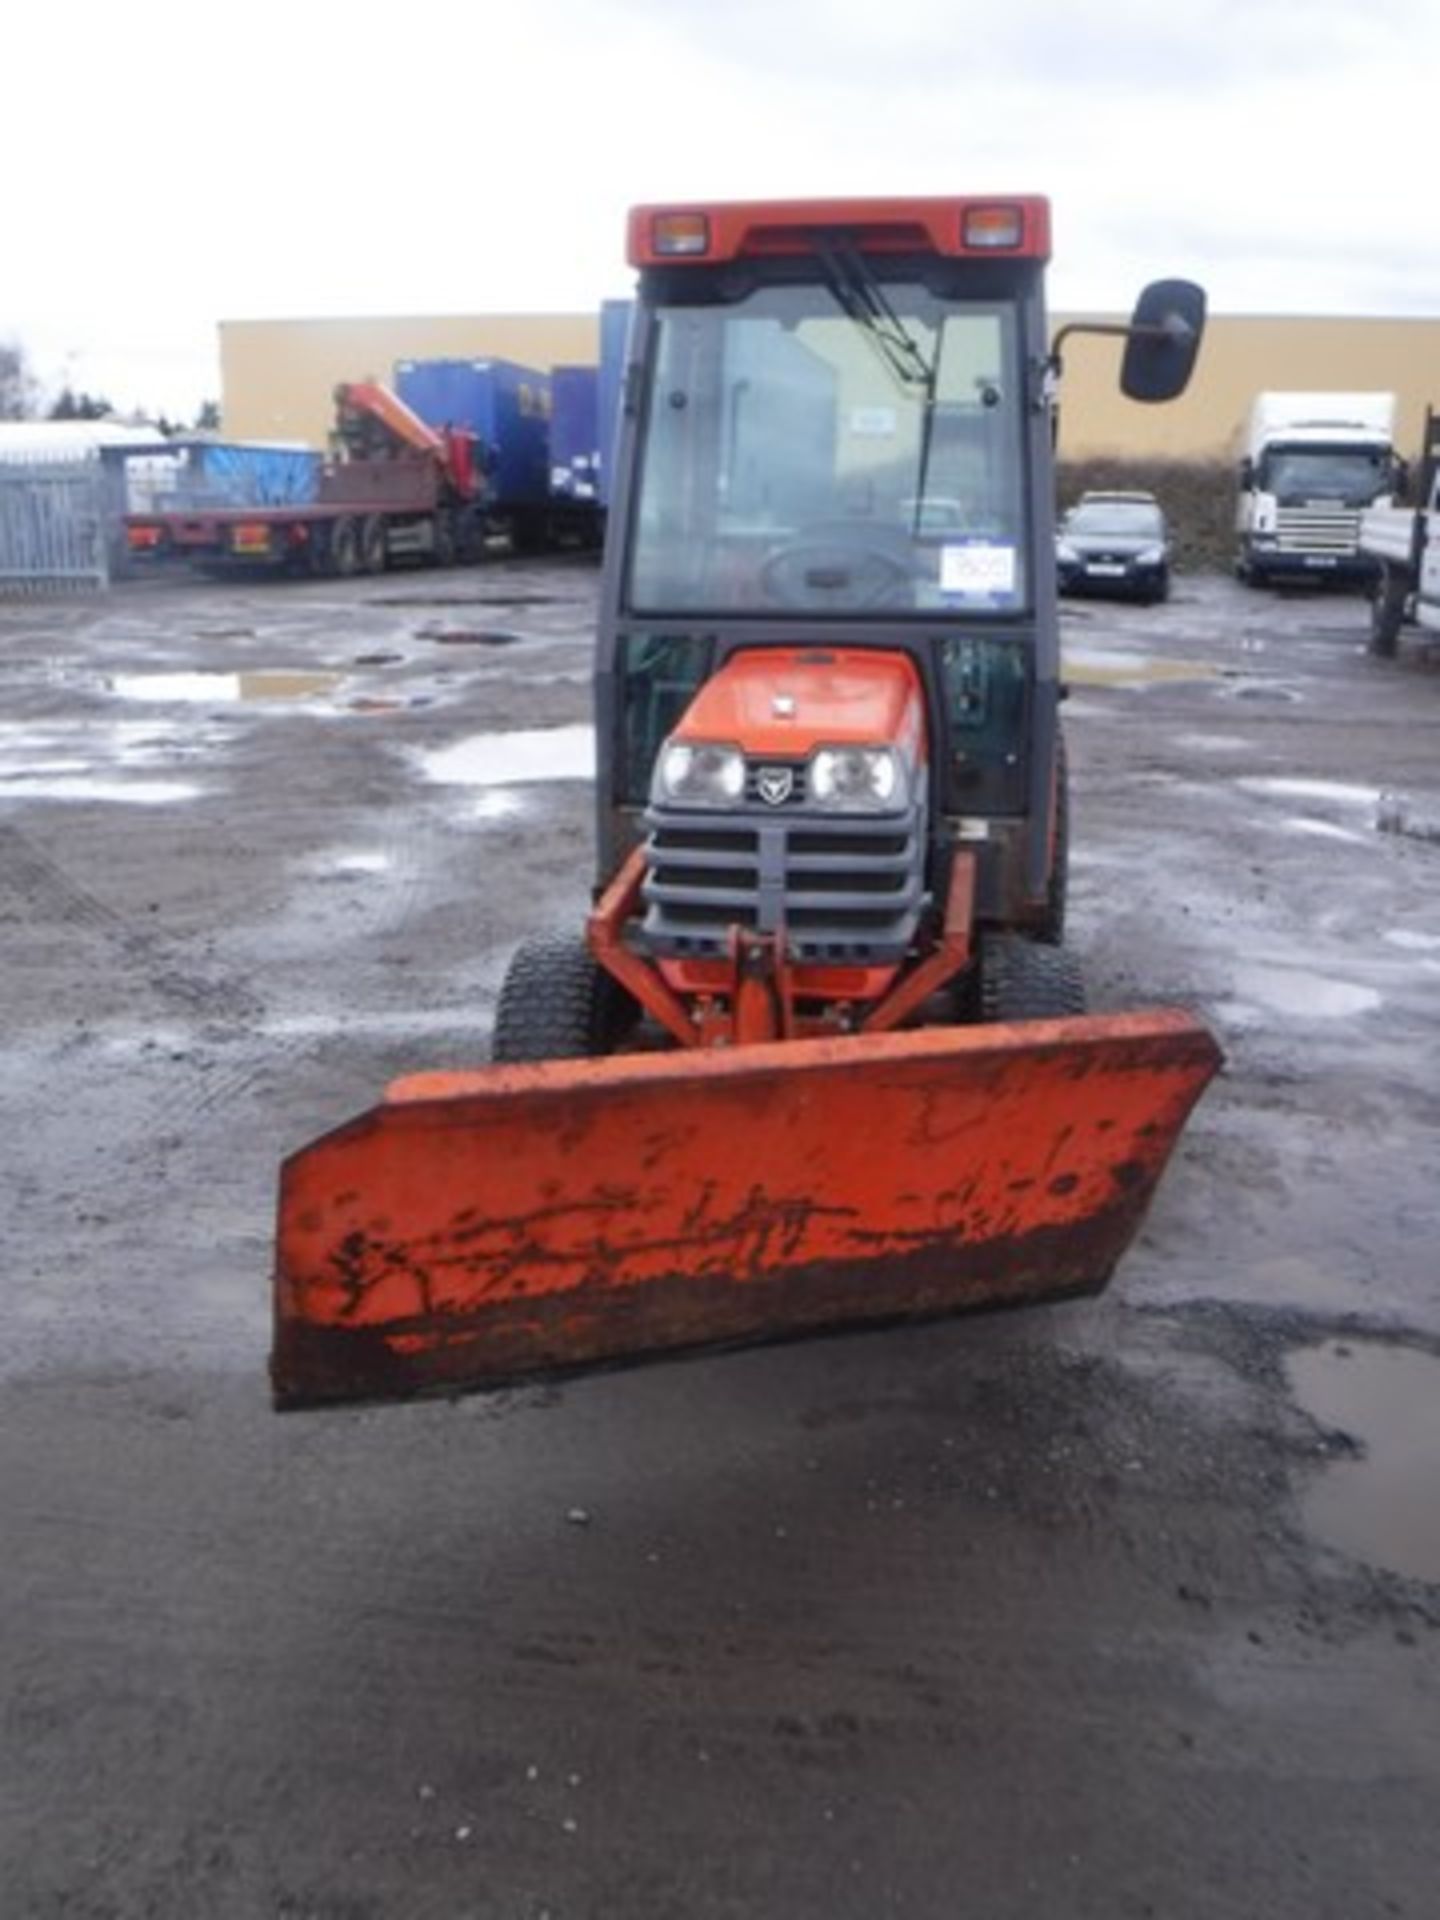 KUBOTA tractor B2100D 2337hrs (not verified) c/w snow plough. V5 in office. - Image 2 of 7